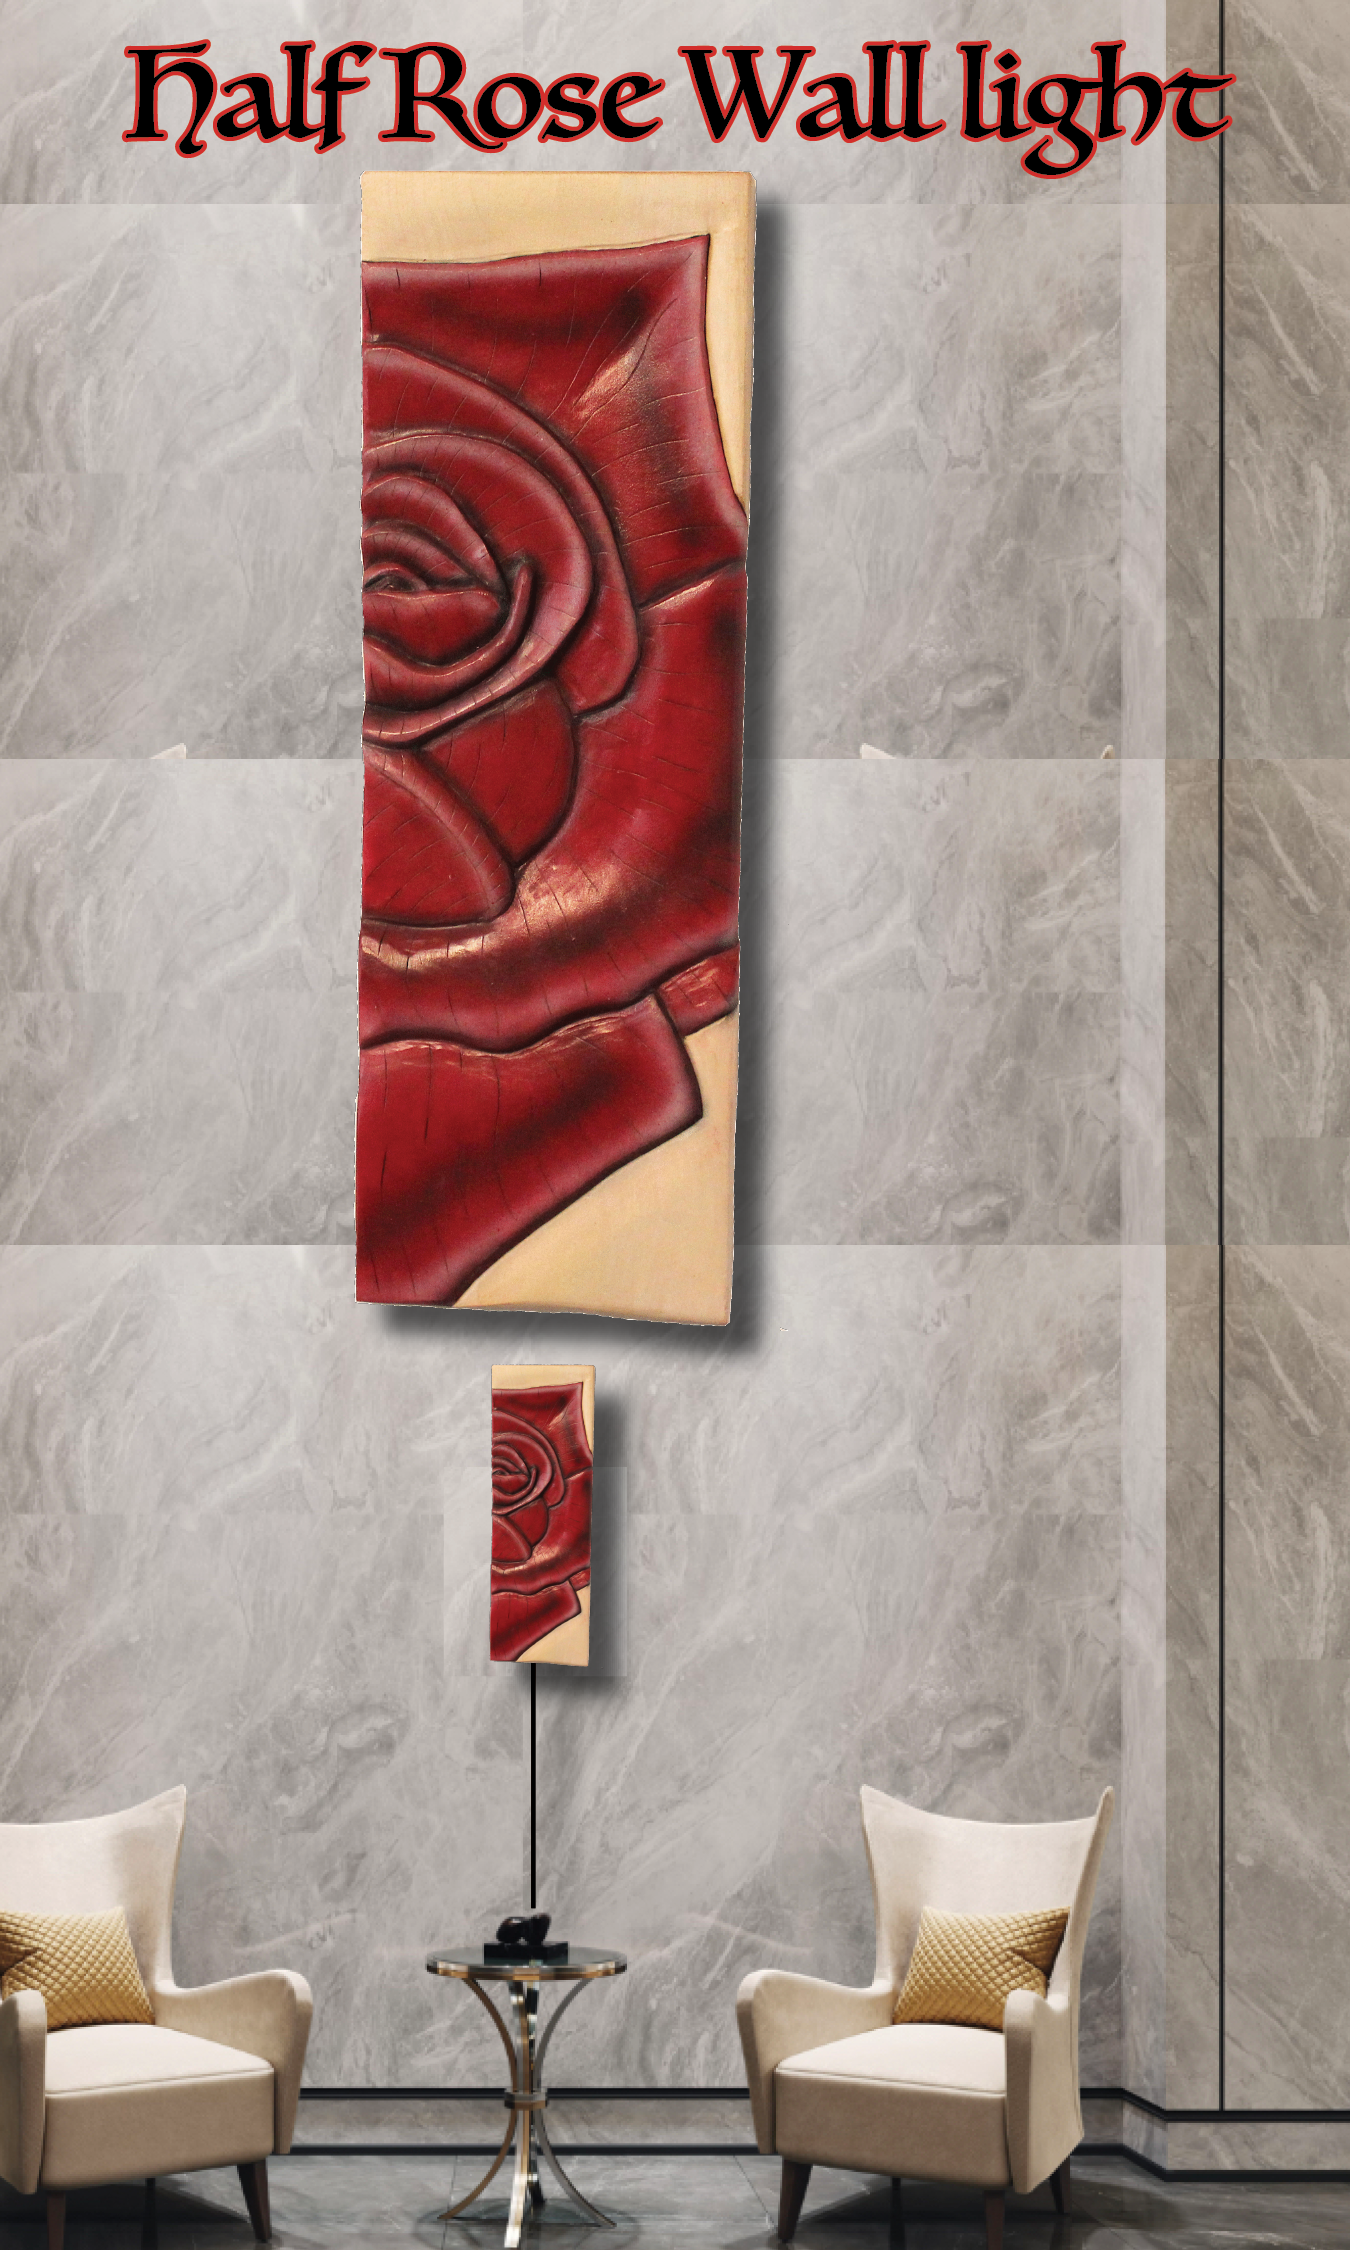 Half Rose Light, Hand-carved and hand-painted uses standard LED lights